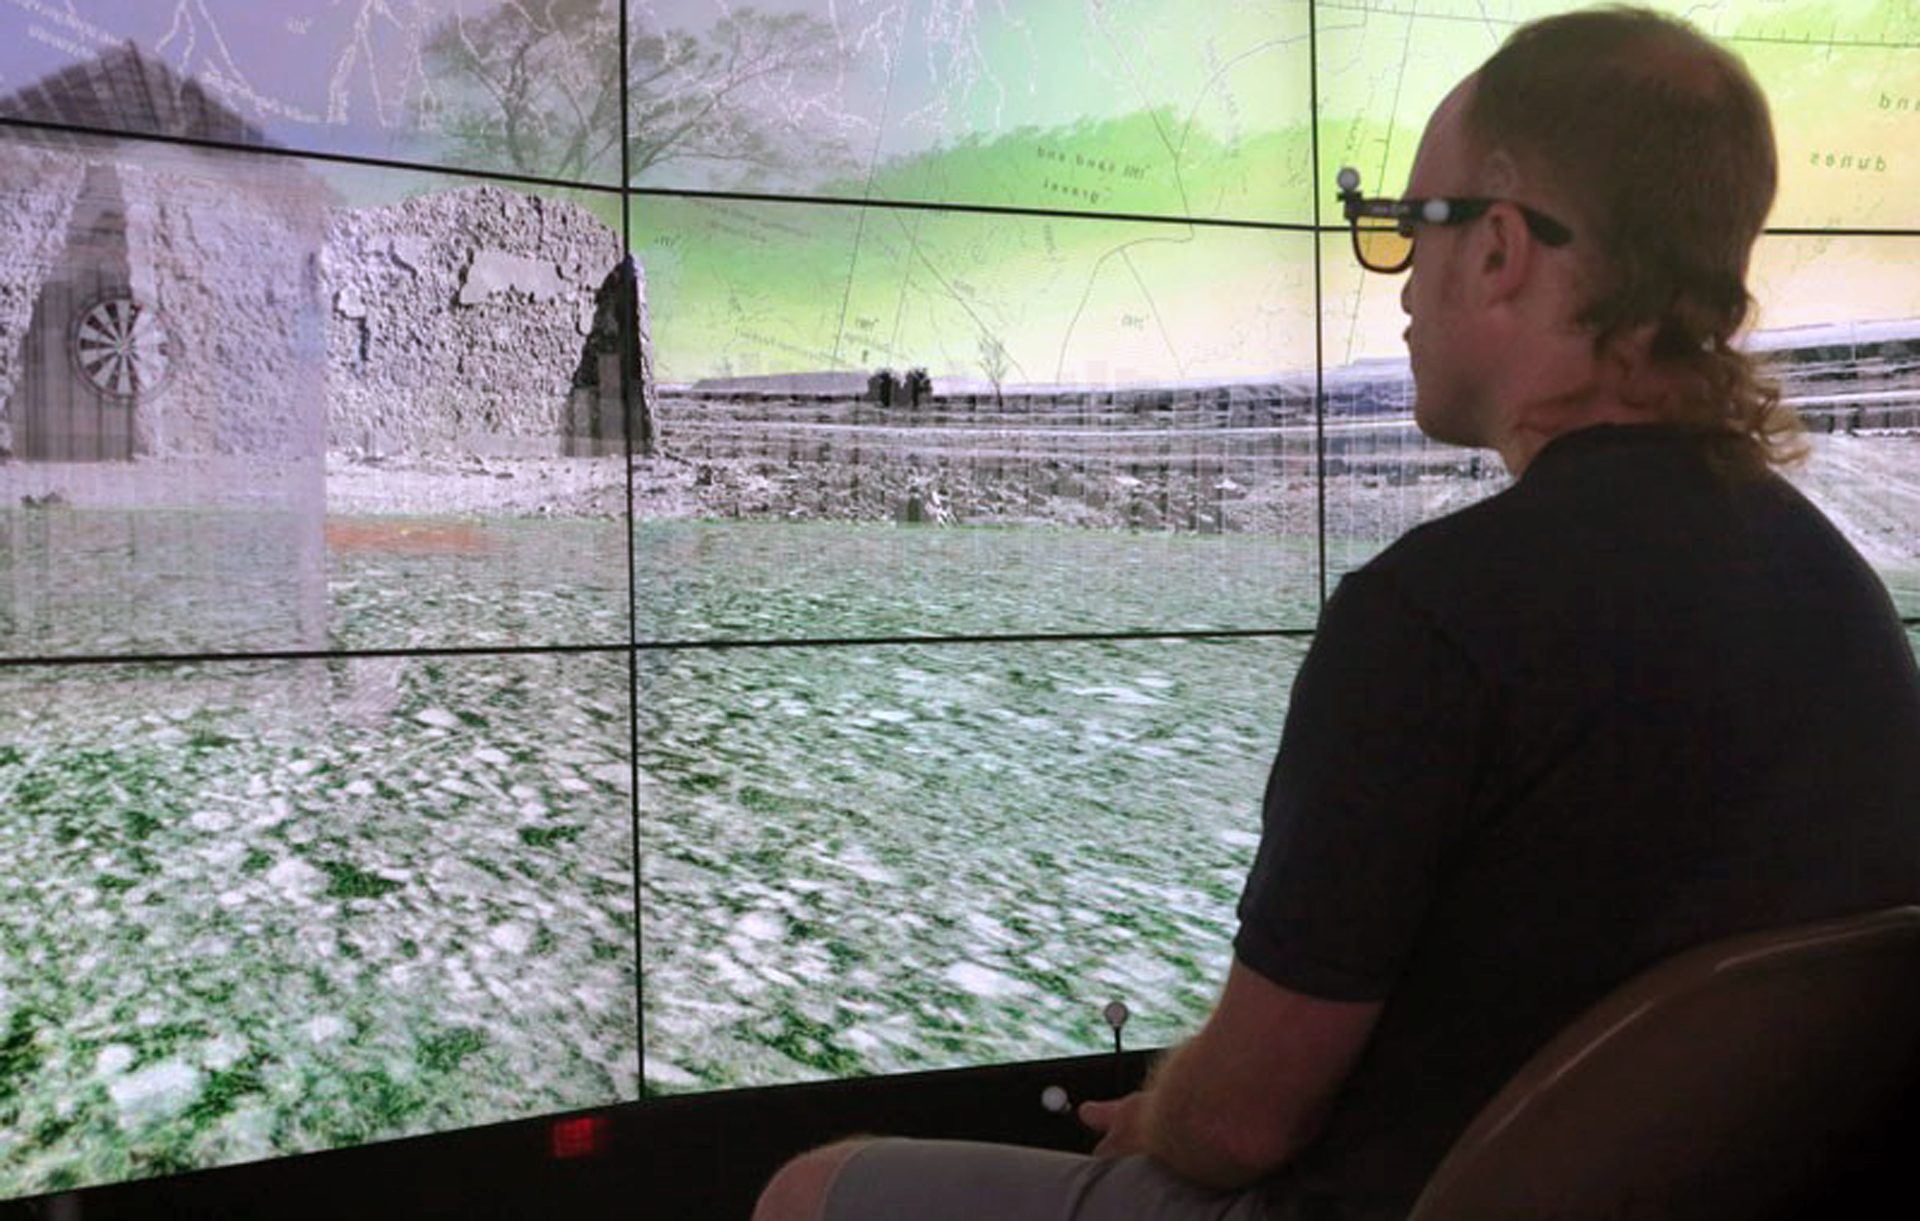 &ldquo;Hearts and Minds&rdquo; shown in the CAVE2&trade; virtual-reality environment. Performer wears stereo glasses with markers for wireless tracking and holds a wand controller for interacting with virtual objects in the scene.